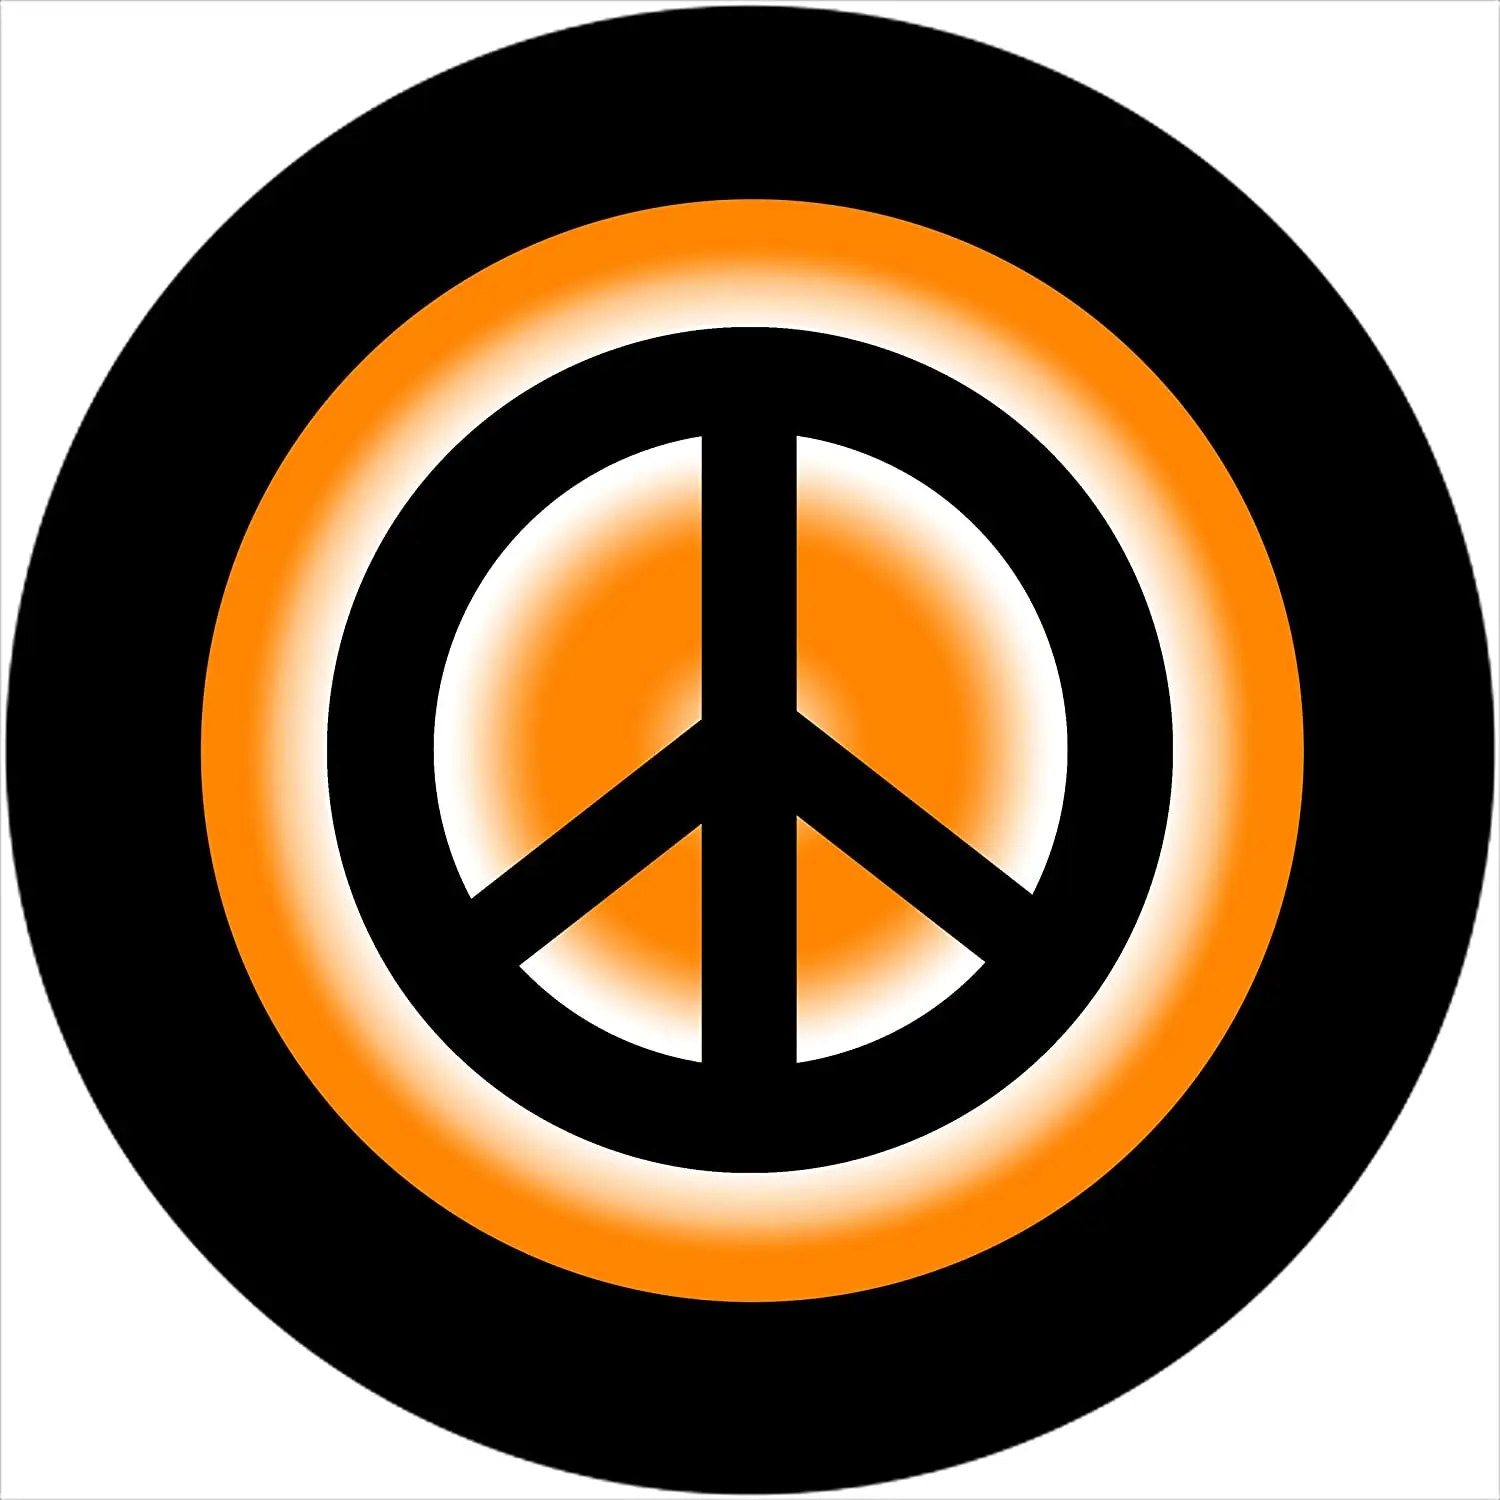 

TIRE COVER CENTRAL Peace Sign Orange Spare Tire Cover ( Custom Sized to Any Make/Model for 255/75R17